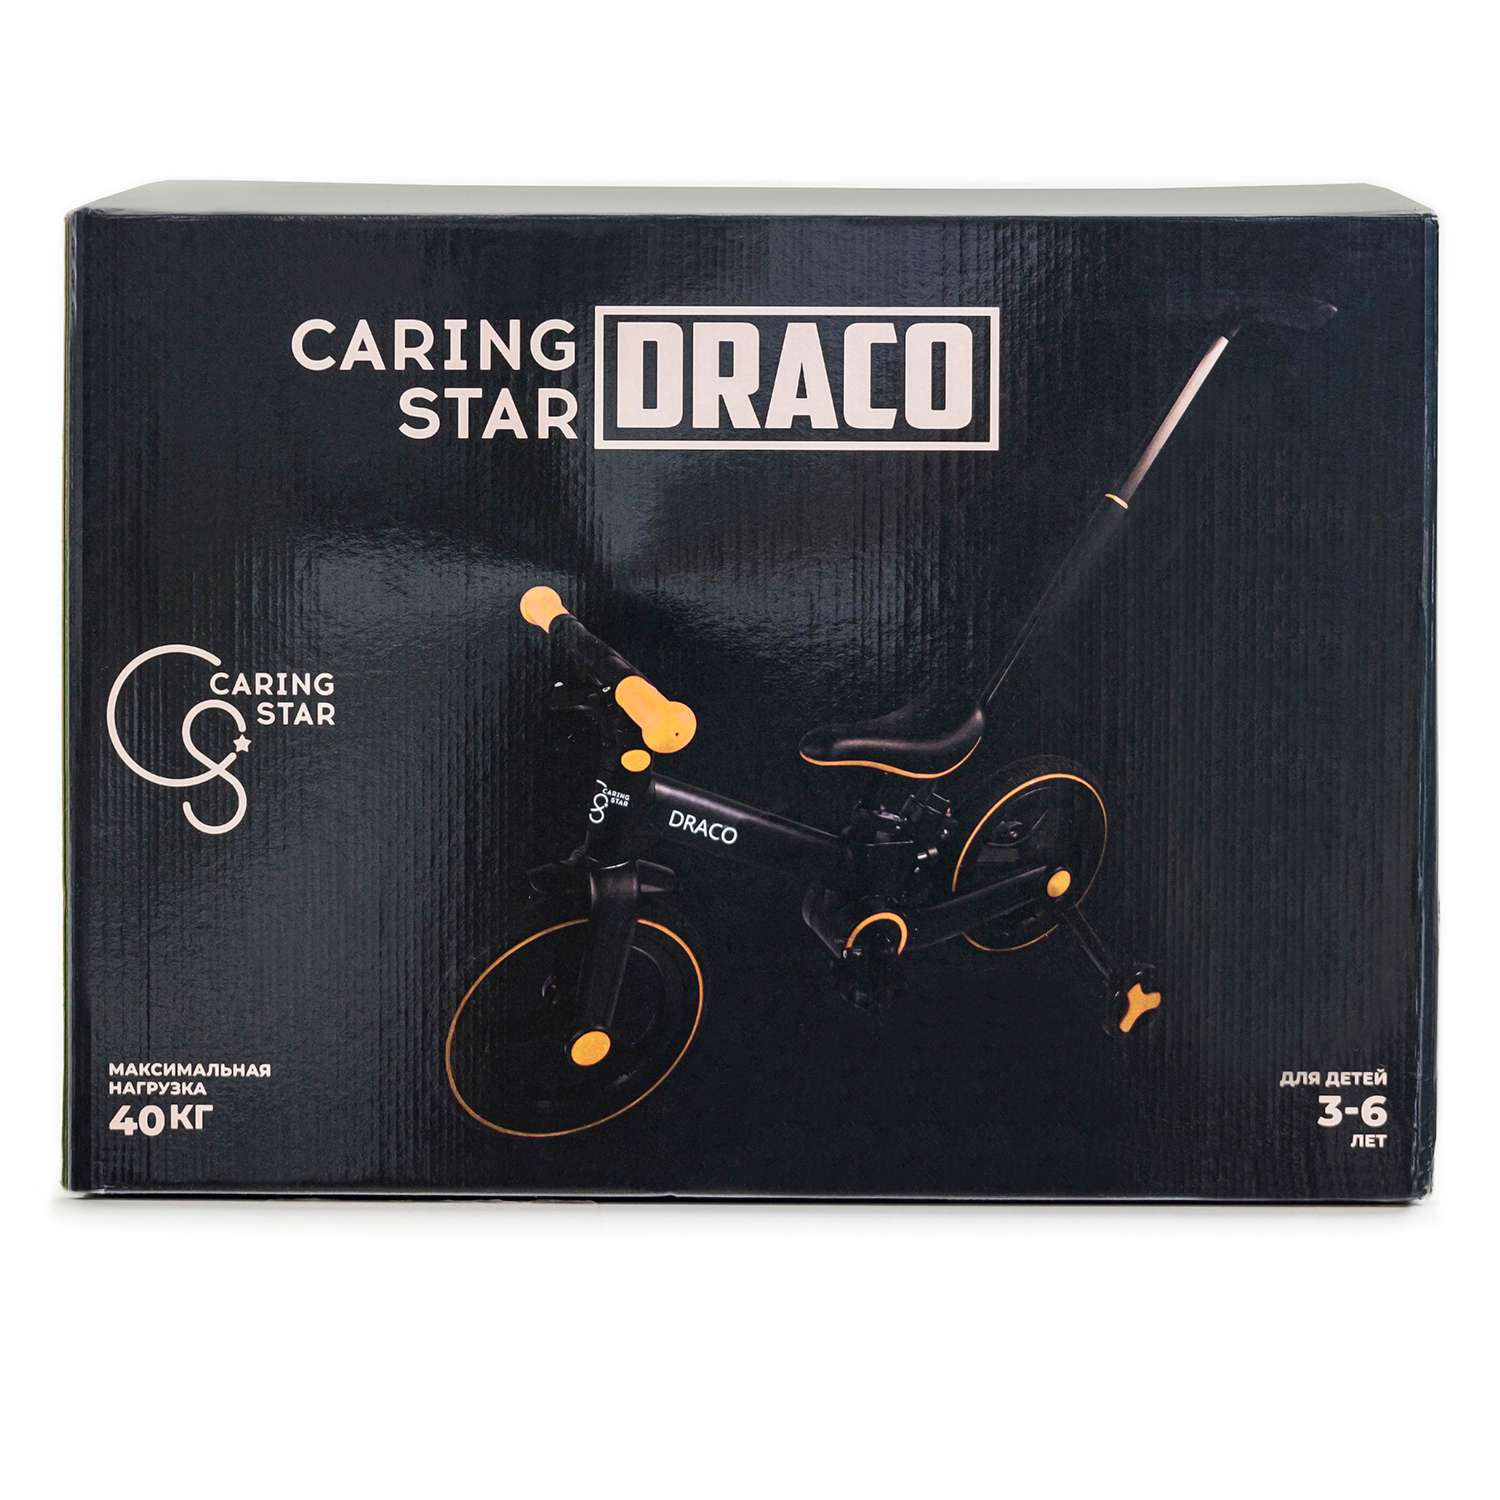 Caring star draco. Велосипед caring Star.